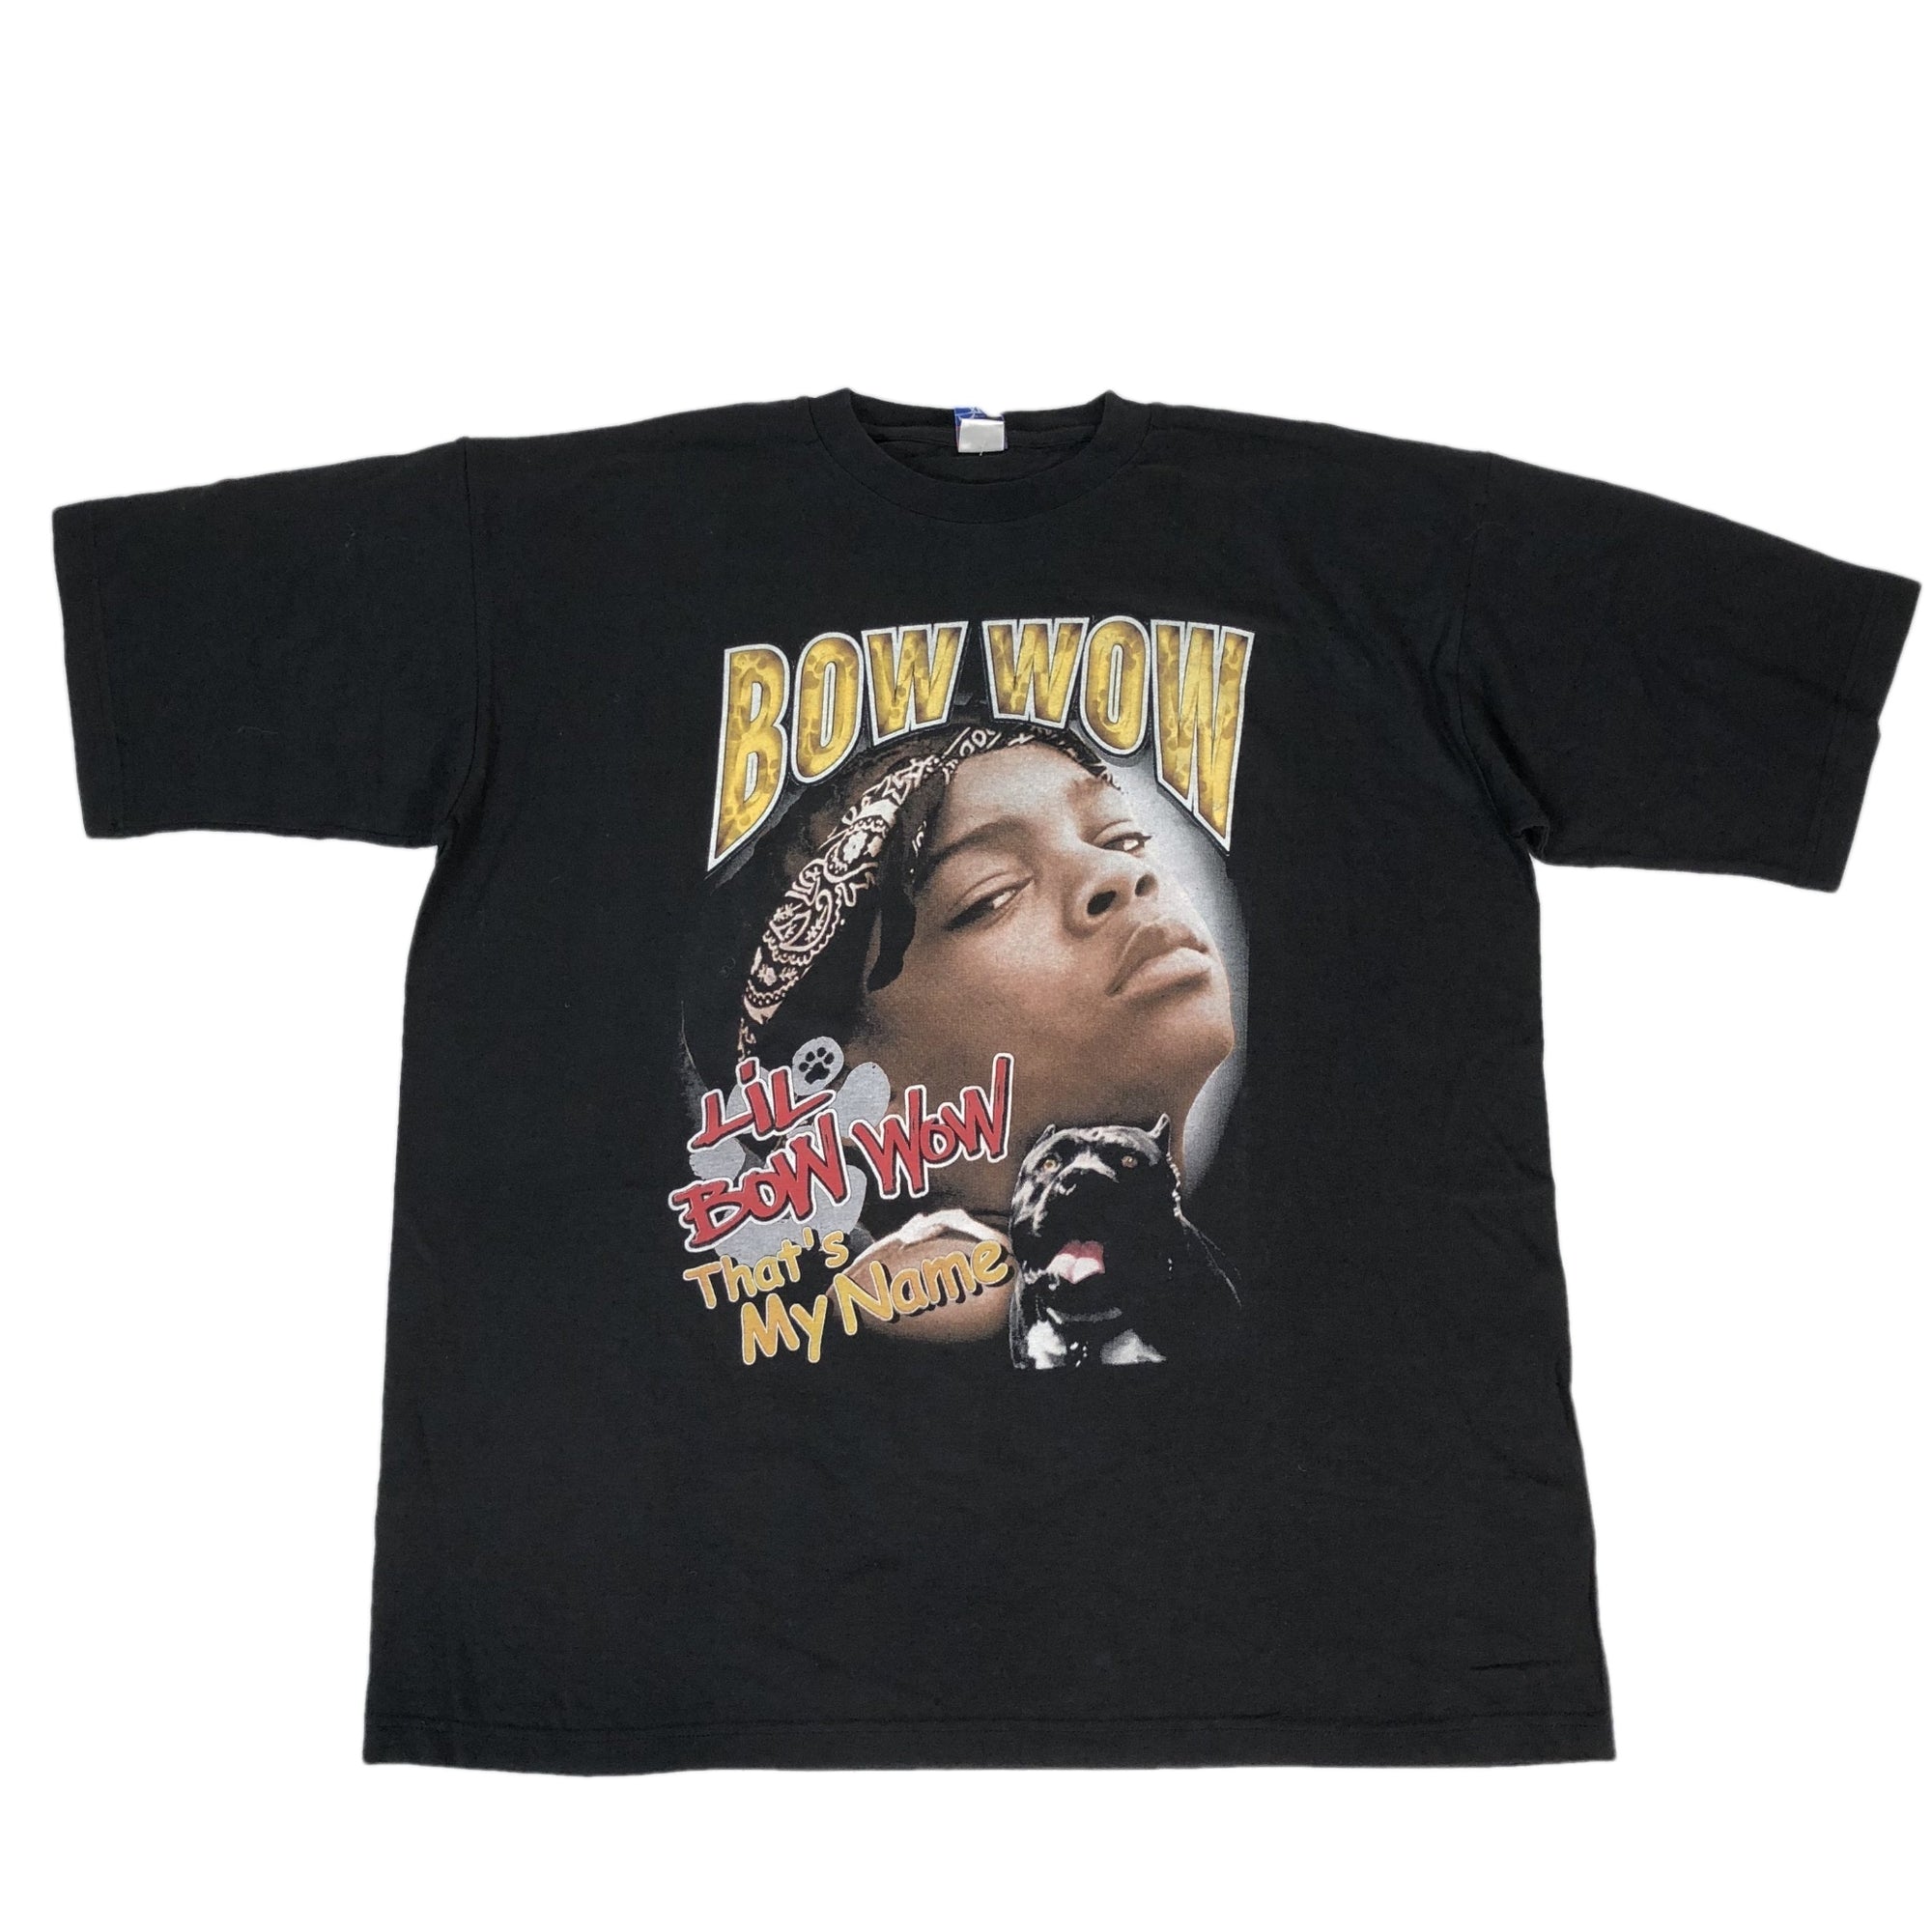 Vintage Lil Bow Wow "That's My Name" T-shirt - jointcustodydc